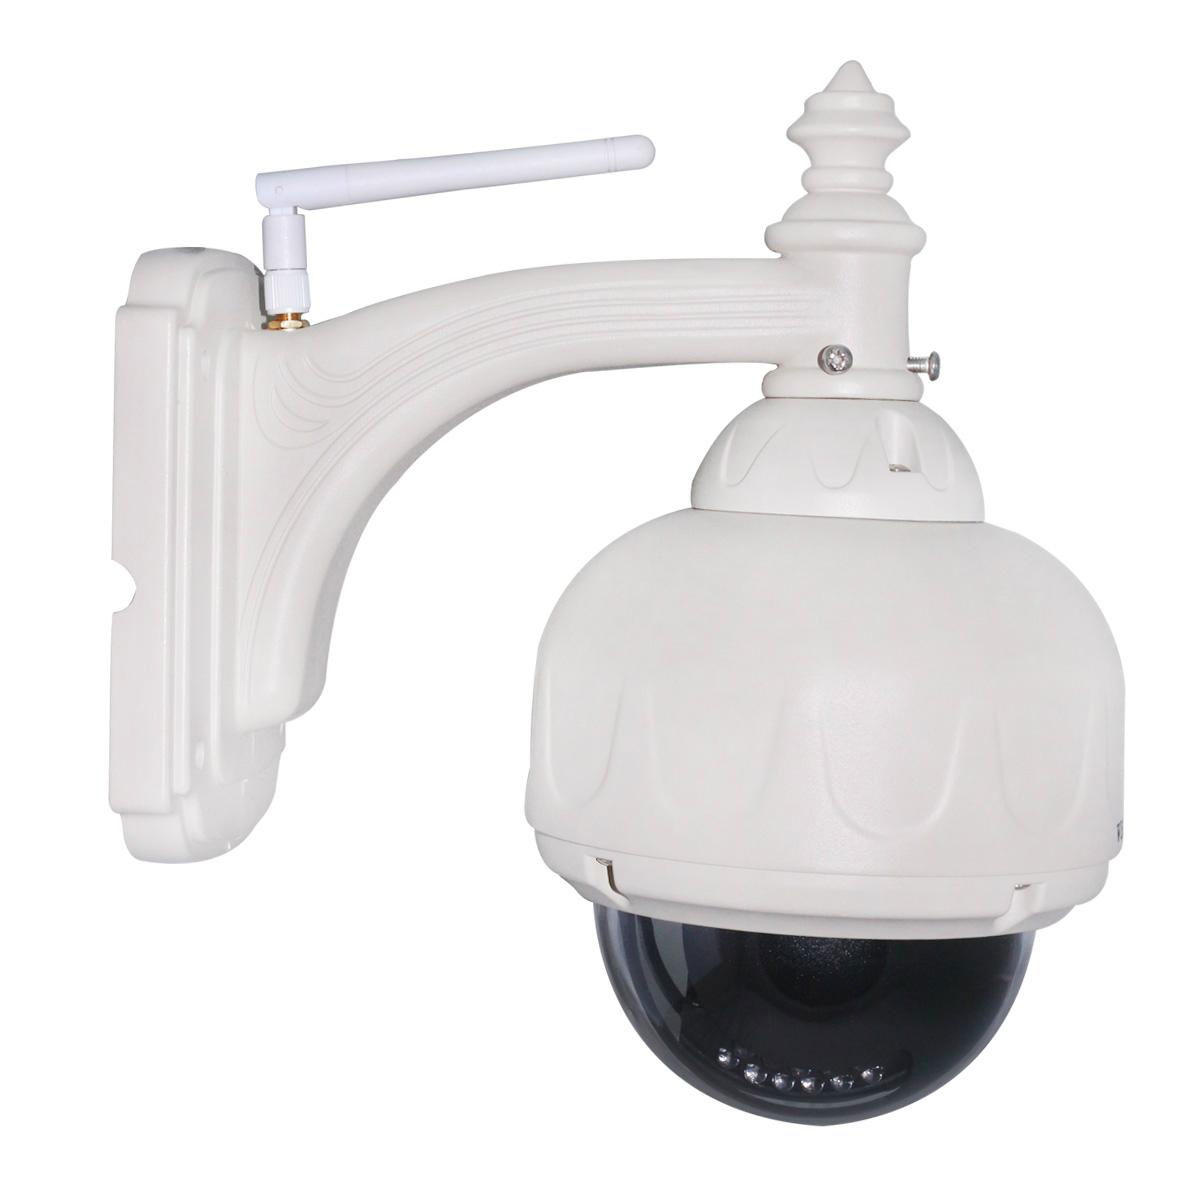 Home Surveillance 1MP HD PTZ Zoom Outdoor Dome H.264 Mobile View IP Camera 3